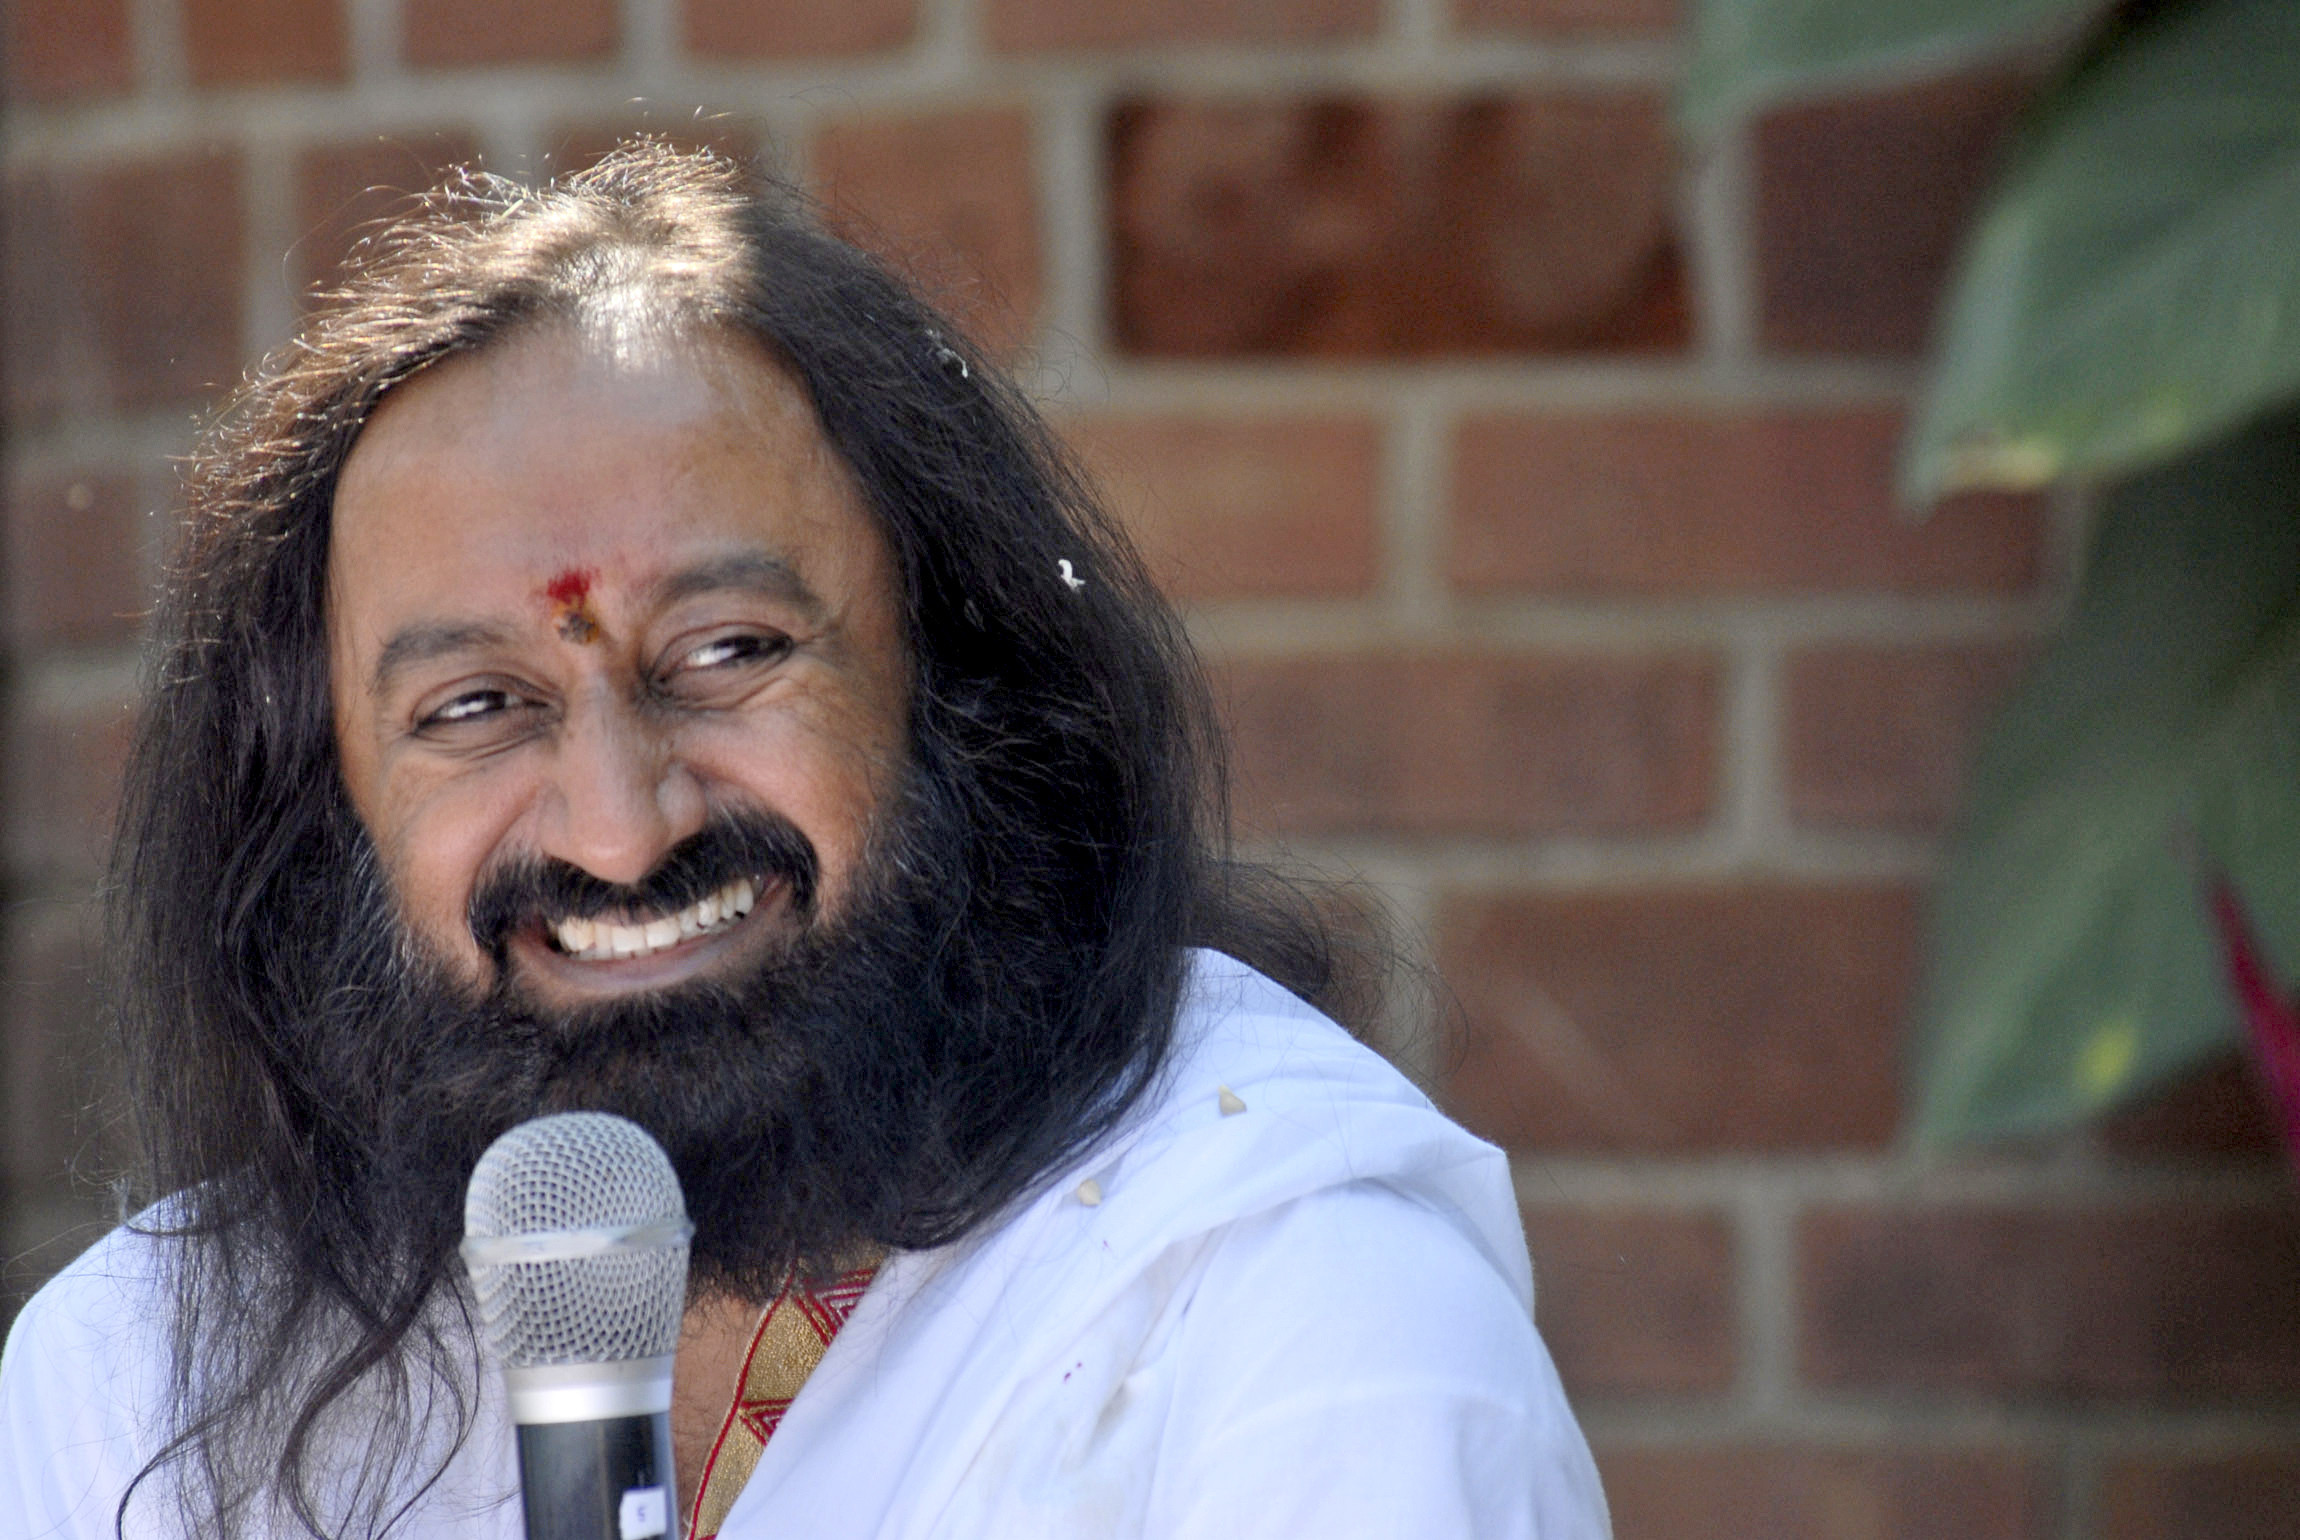 Sri Sri Ravi Shankar Had Reached Out To The ISIS For Peace